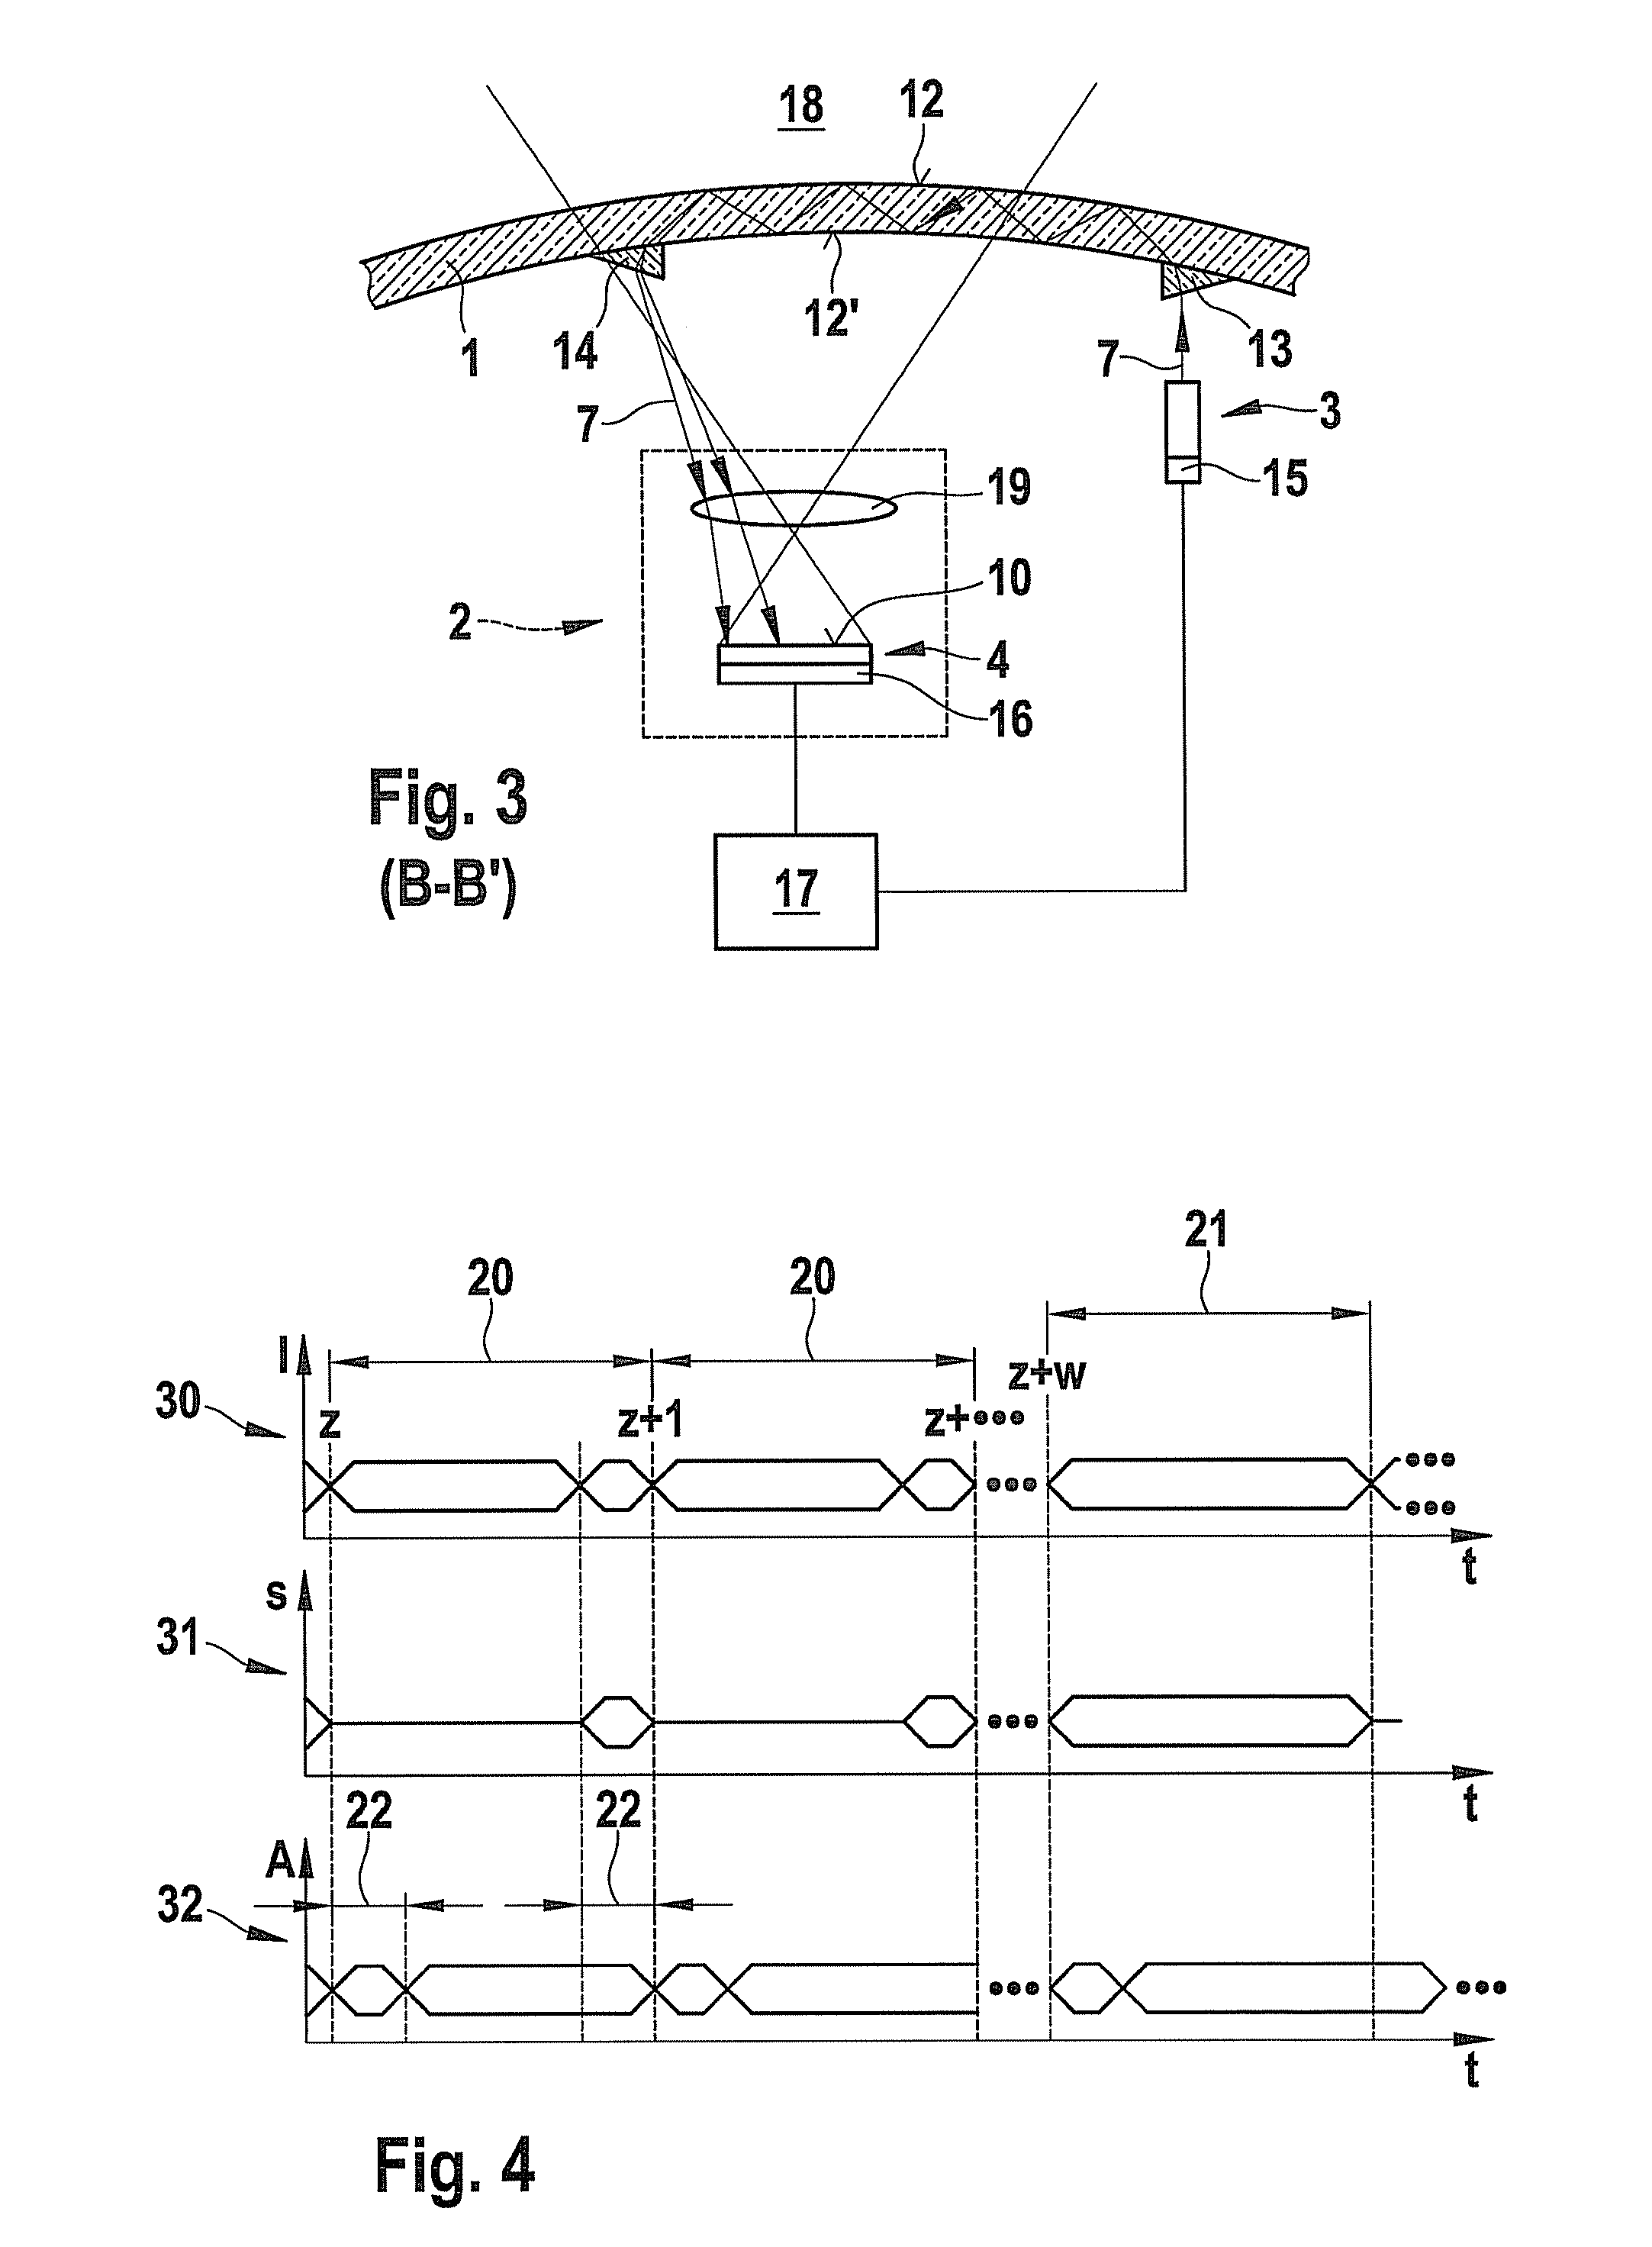 Camera system and method for detecting the surroundings of a vehicle